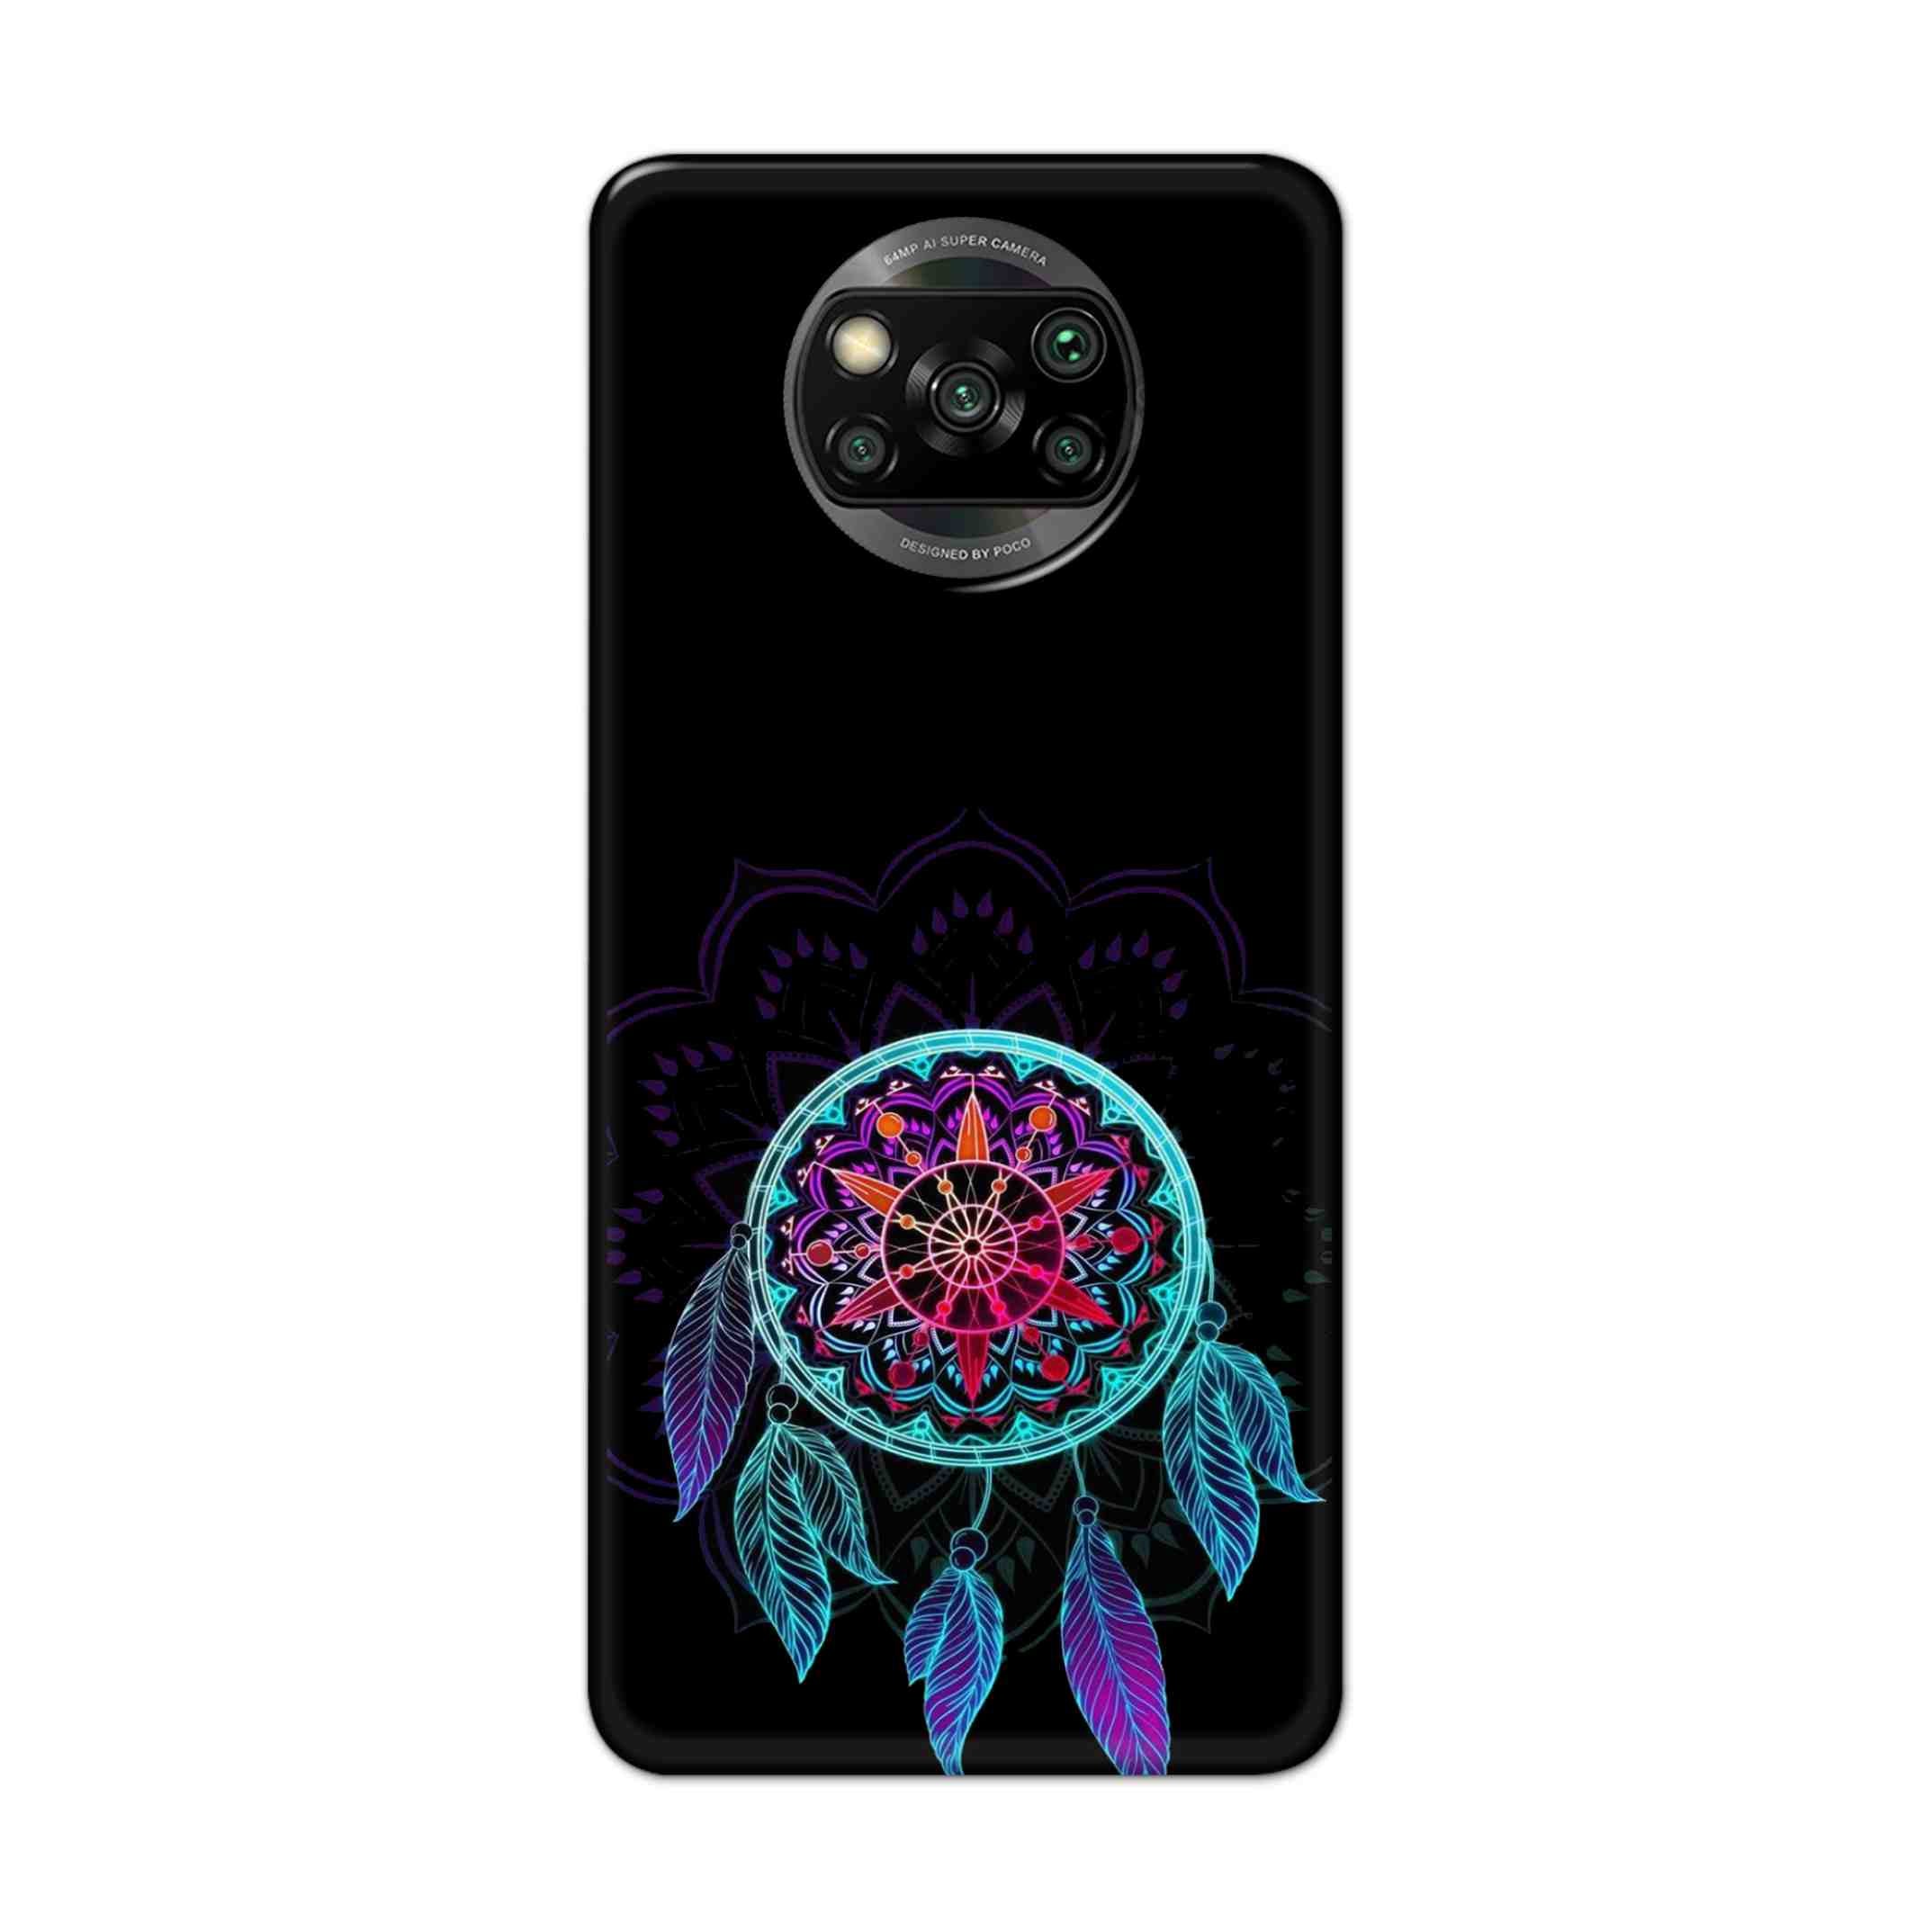 Buy Dream Catcher Hard Back Mobile Phone Case Cover For Pcoc X3 NFC Online